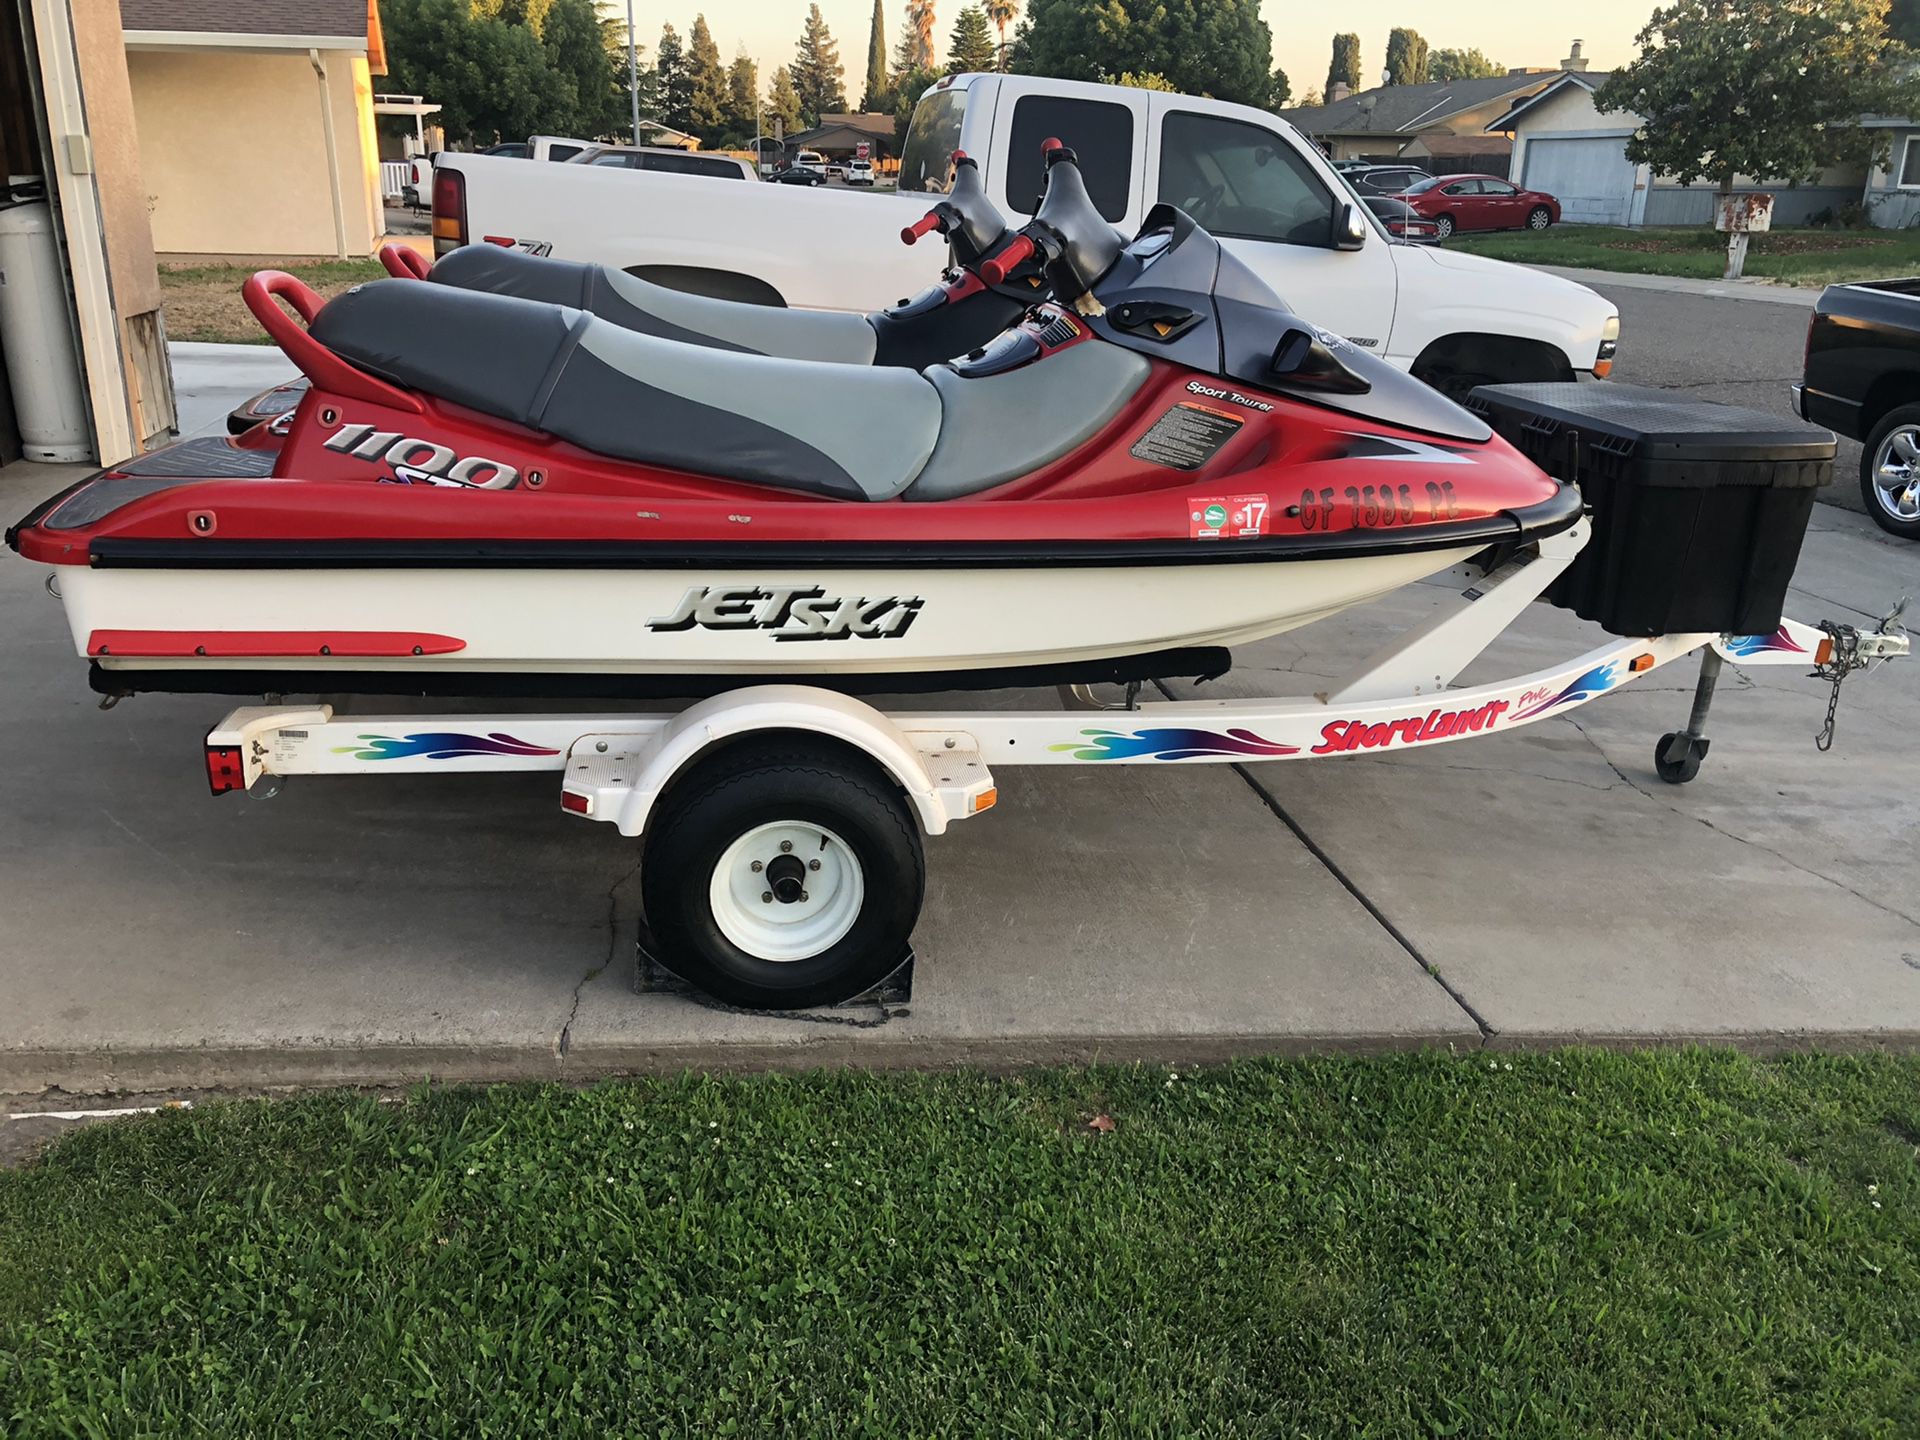 2 Jet Skis and Trailer